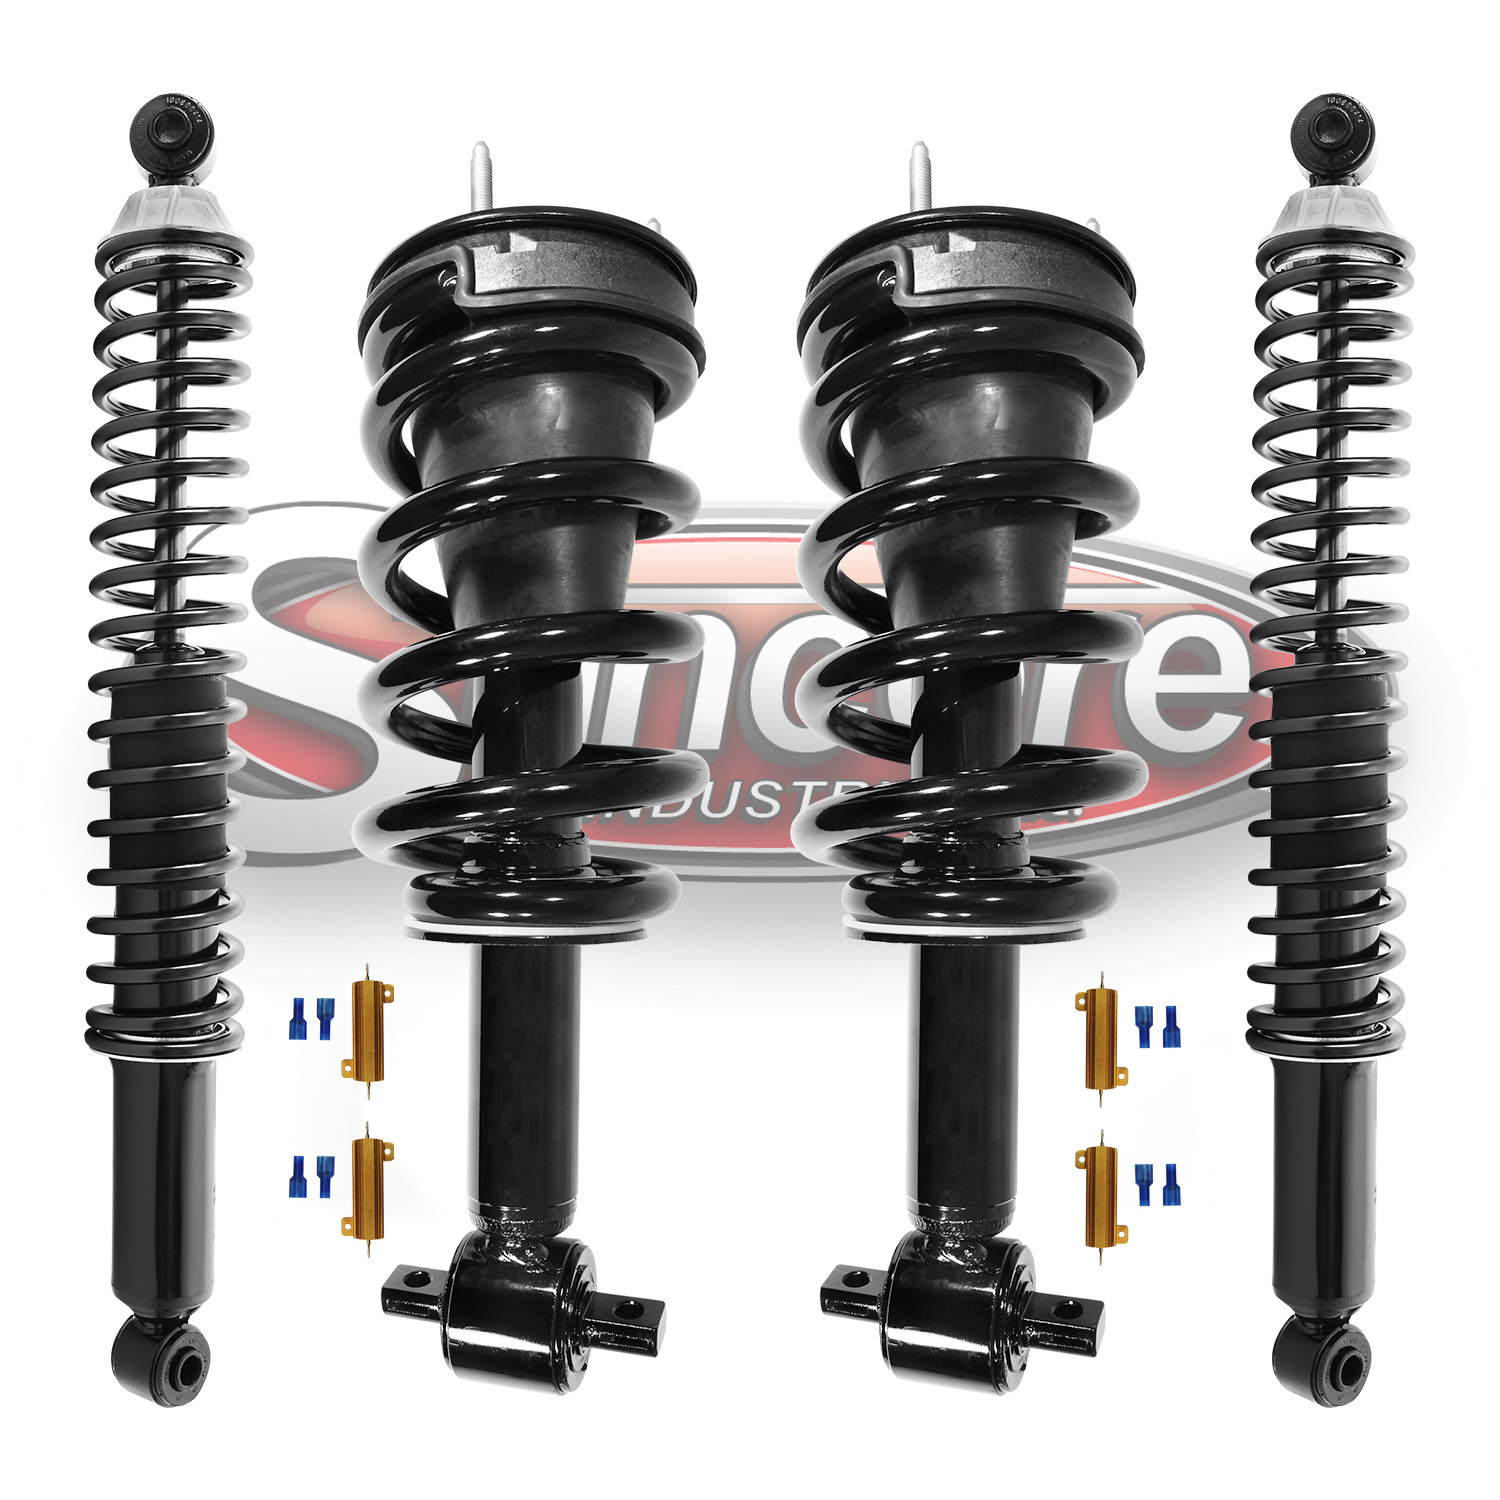 Autoride Z55 Suspension Conversion Complete Struts & Shocks with Bypass - GMC, Cadillac & Chevy